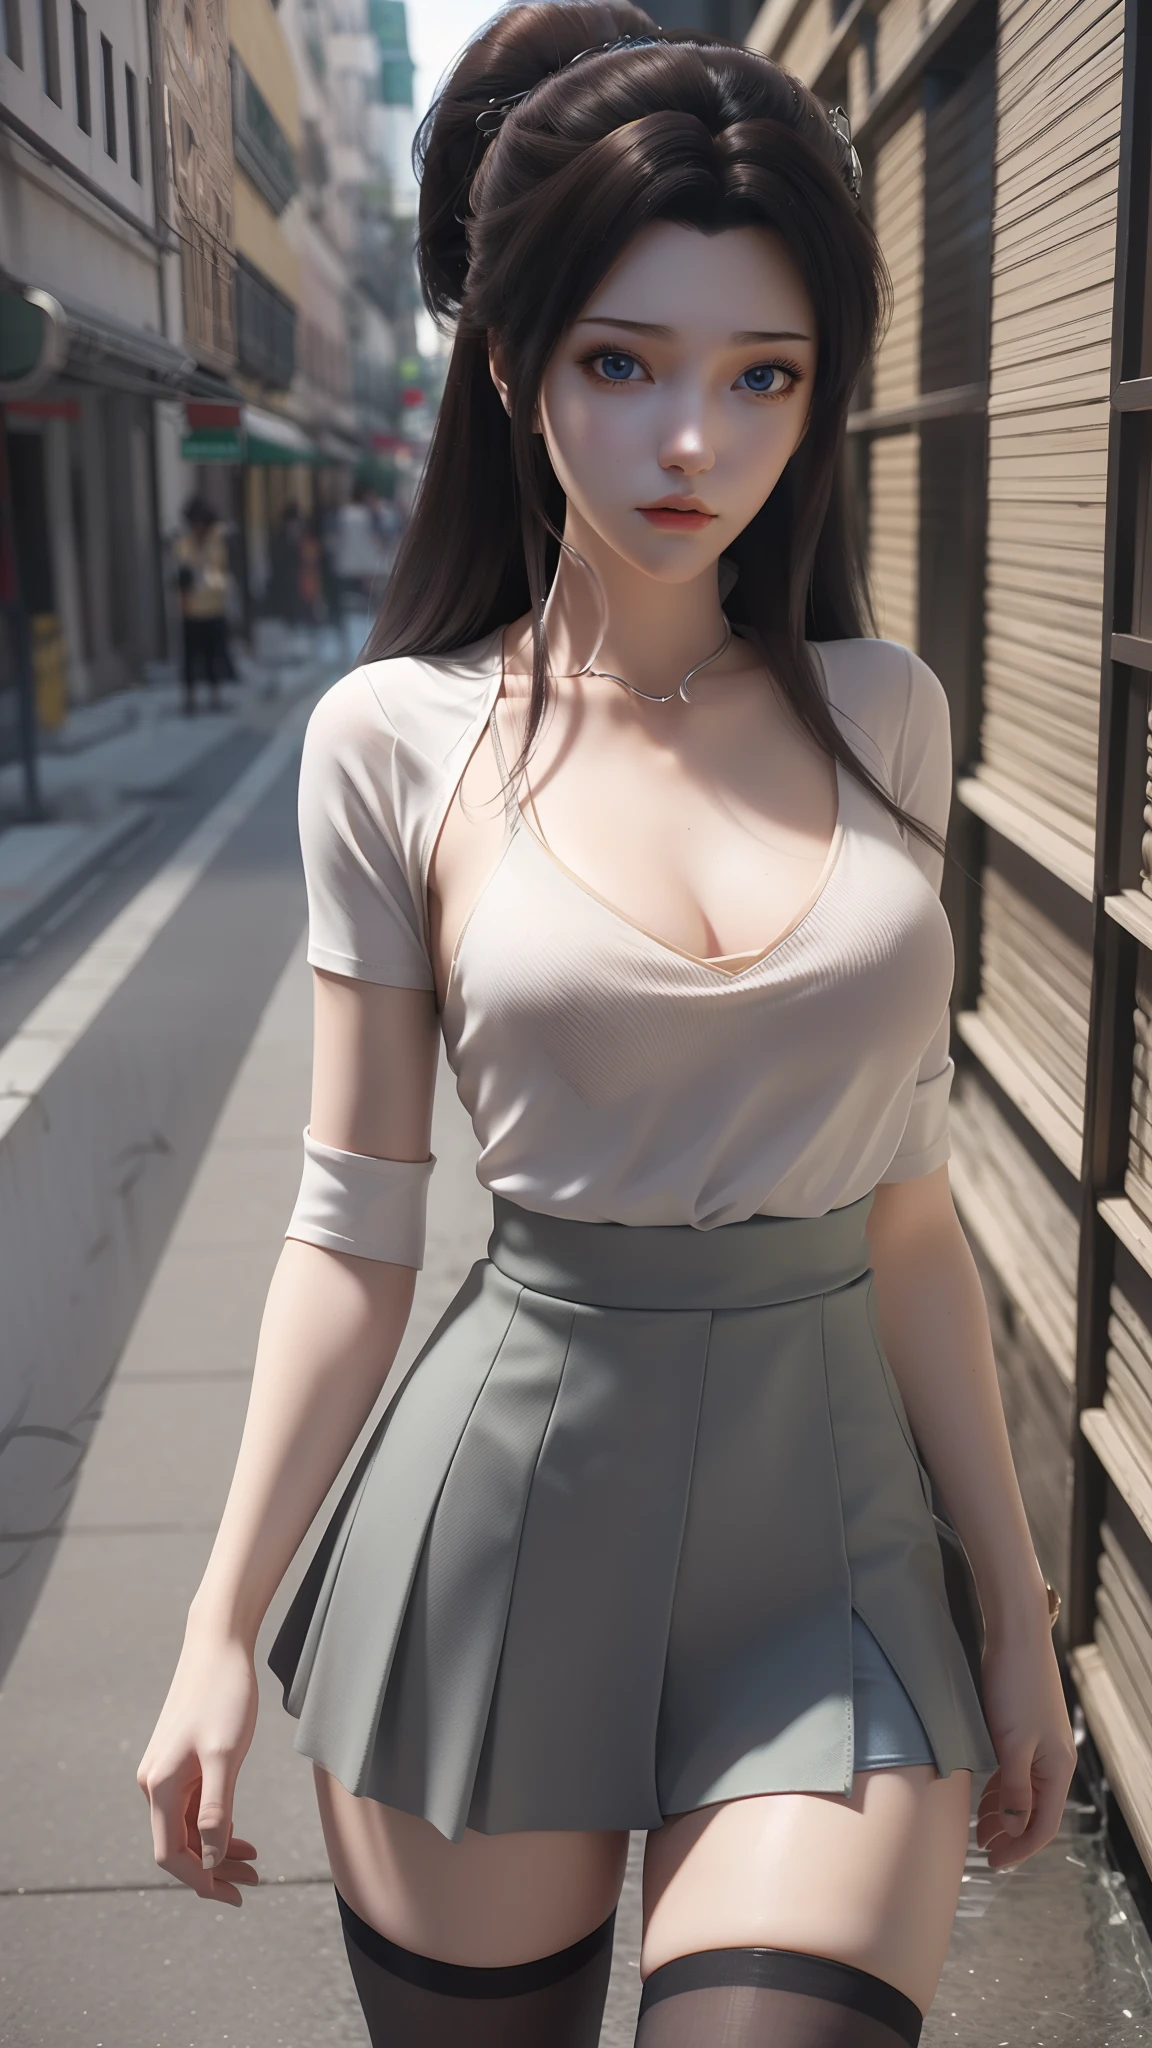 anime - style image of a woman in a short skirt and shirt, seductive anime girls, Smooth anime CG art, Surrealism female students, Surrealism female students, thighhighs and skirt, photorealistic anime girl rendering, beautiful and seductive anime woman, Realistic , Realistic anime 3 D style, 3 d anime realistic, Beautiful Anime High School Girls